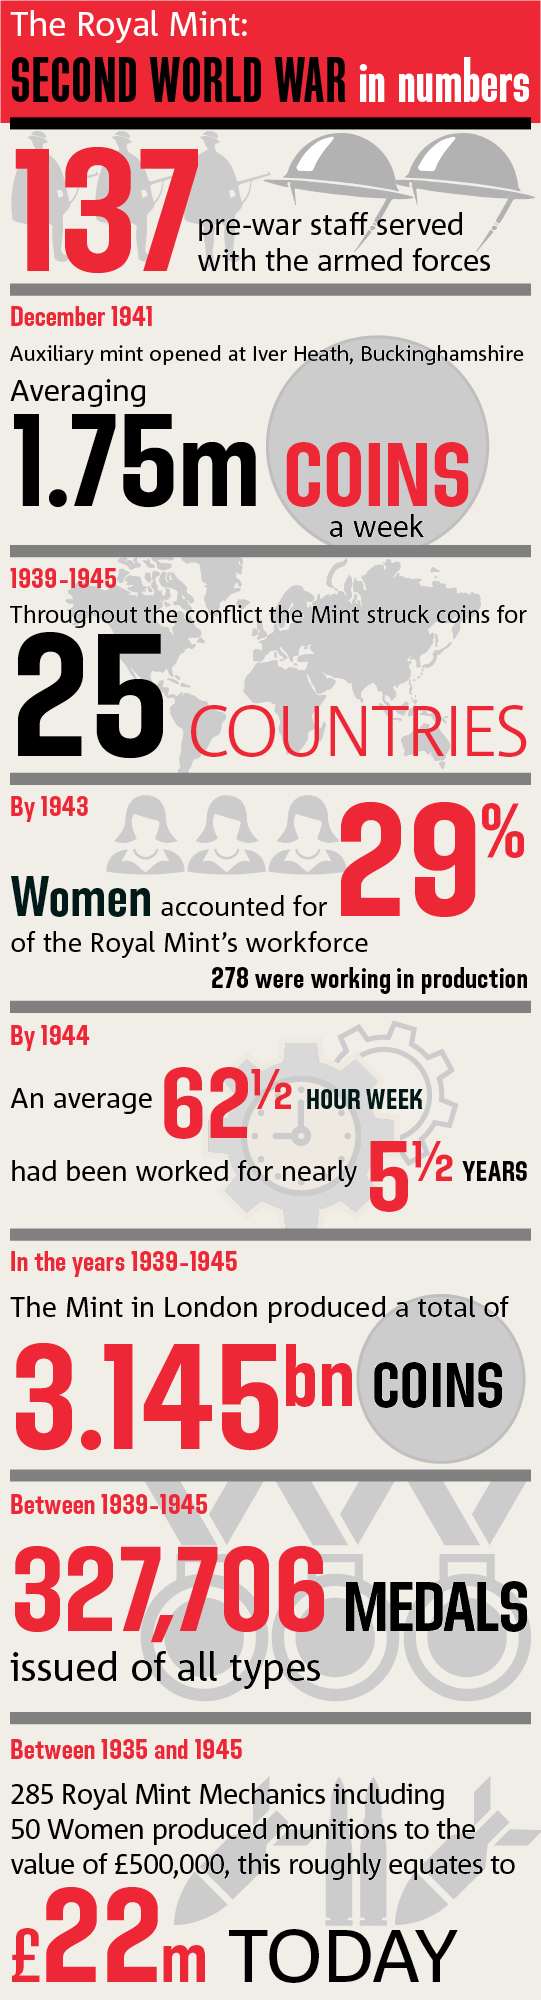 8739_RMM_WWII infographic_541x2000px_Fin.png